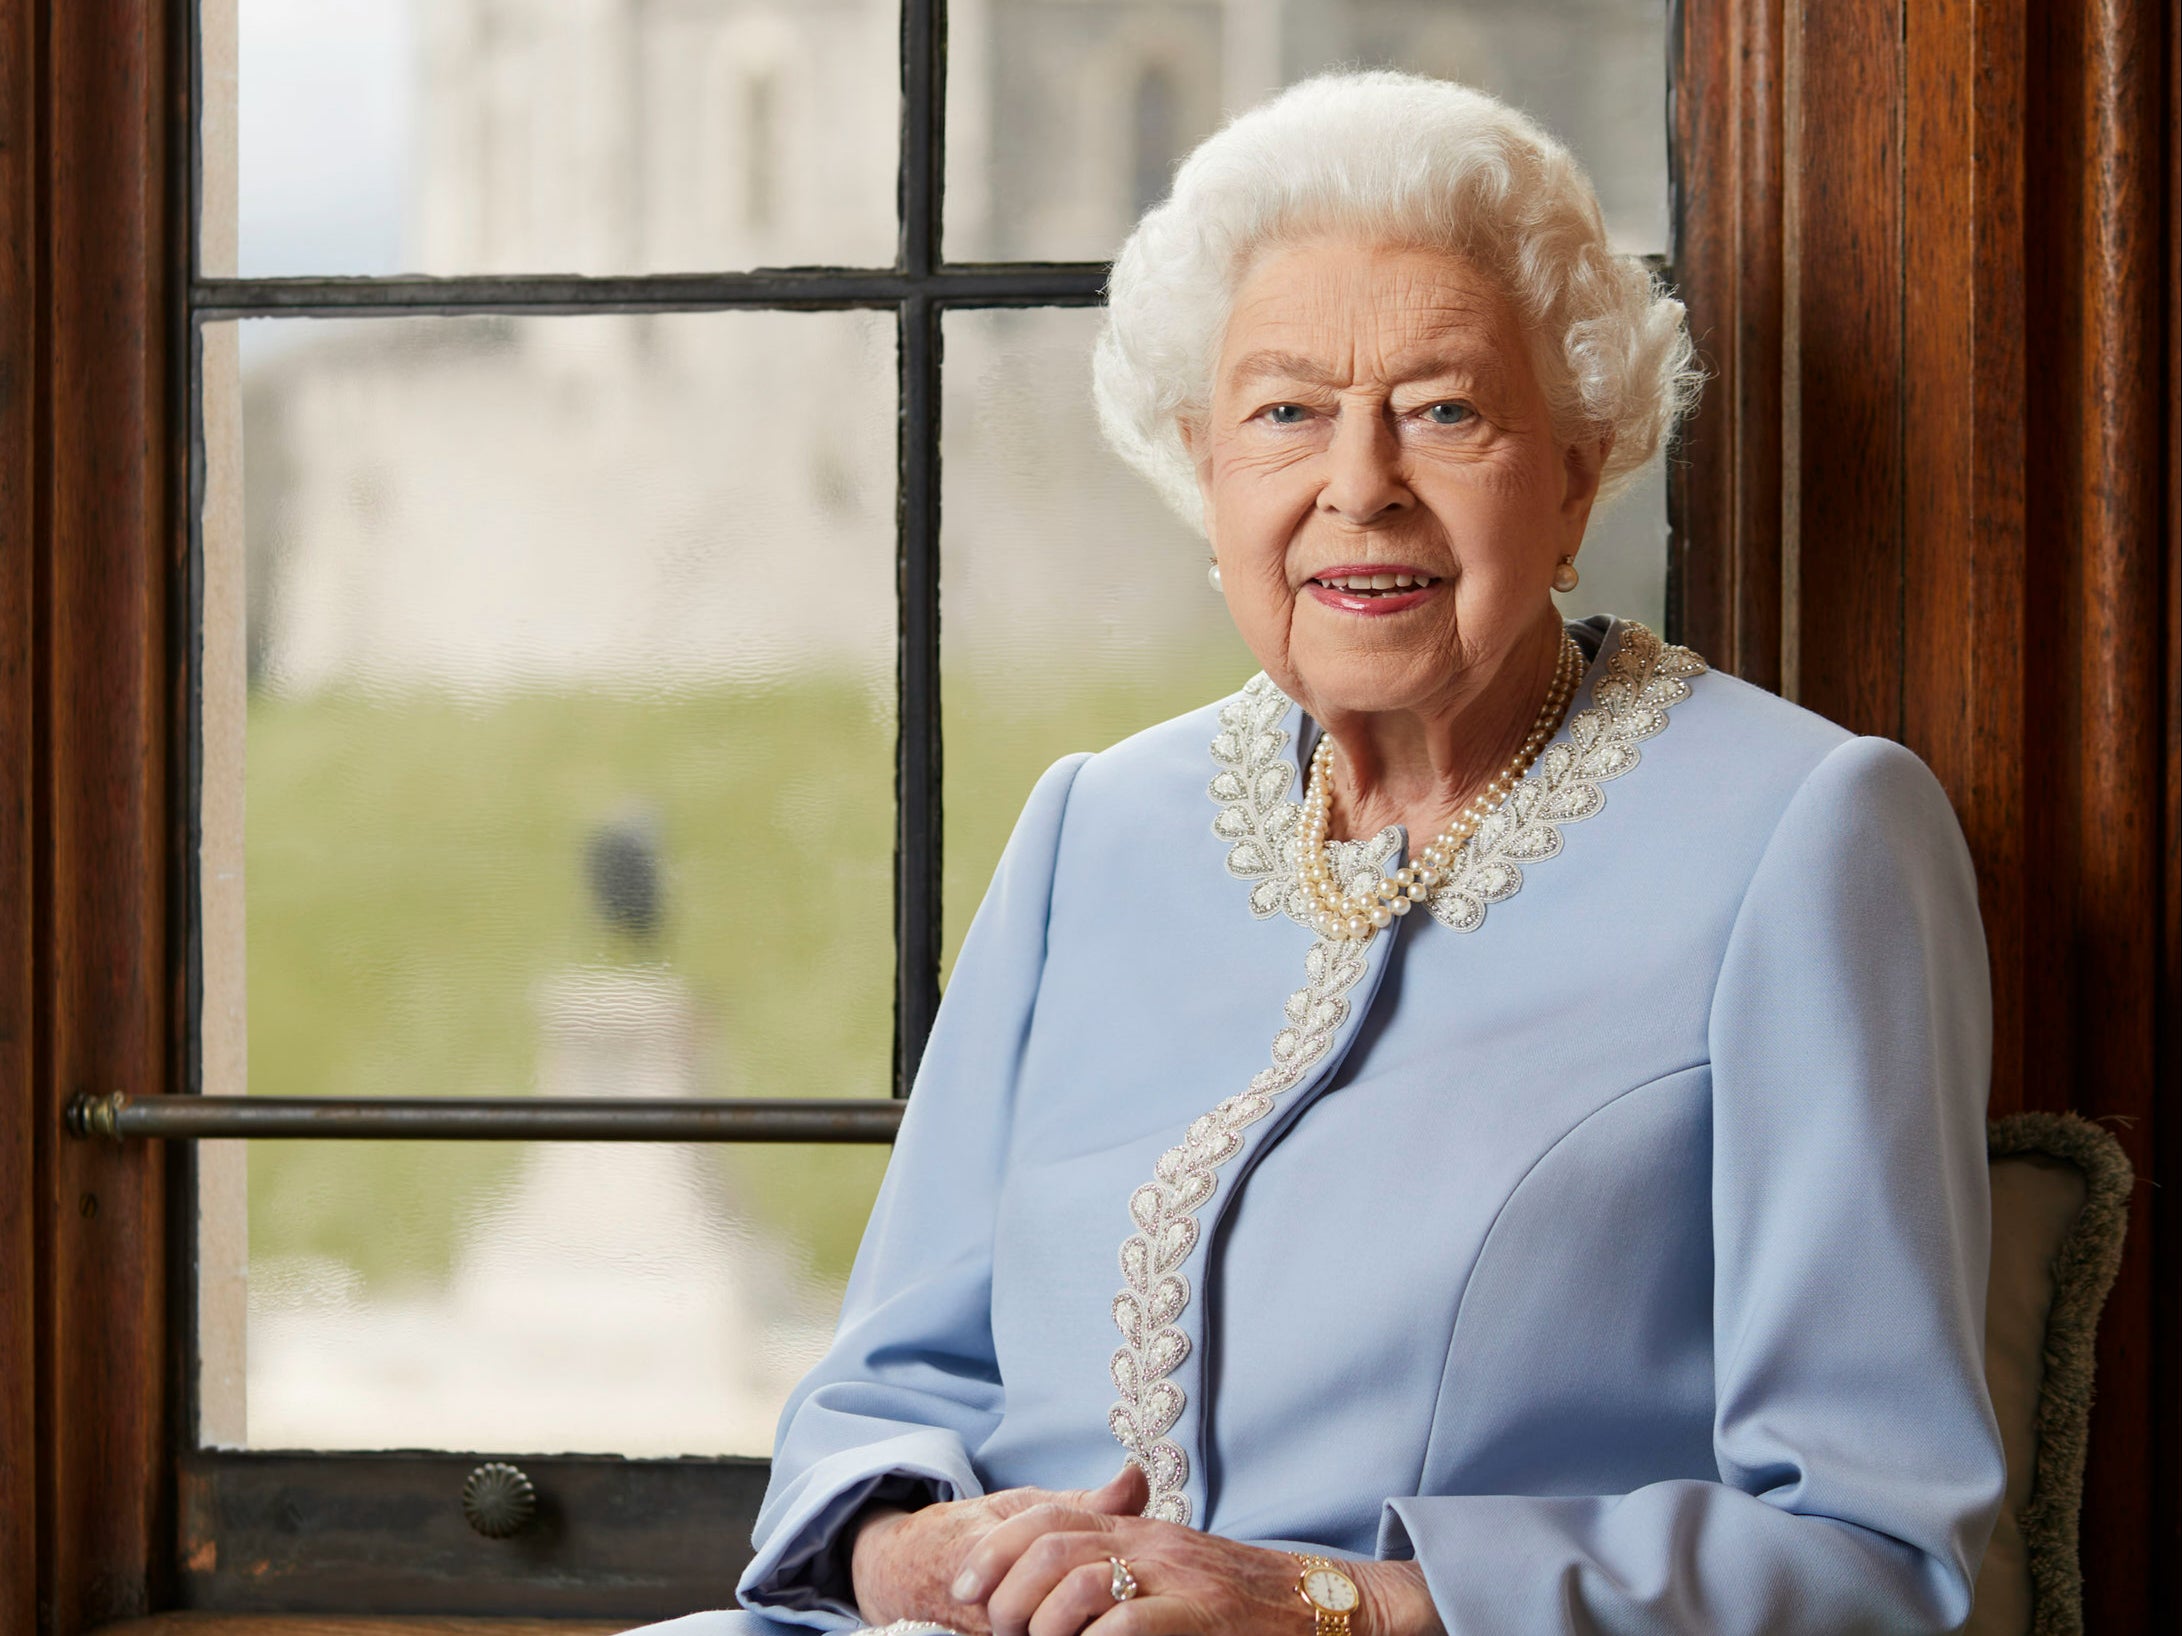 The Queen will celebrate her platinum jubilee this weekend